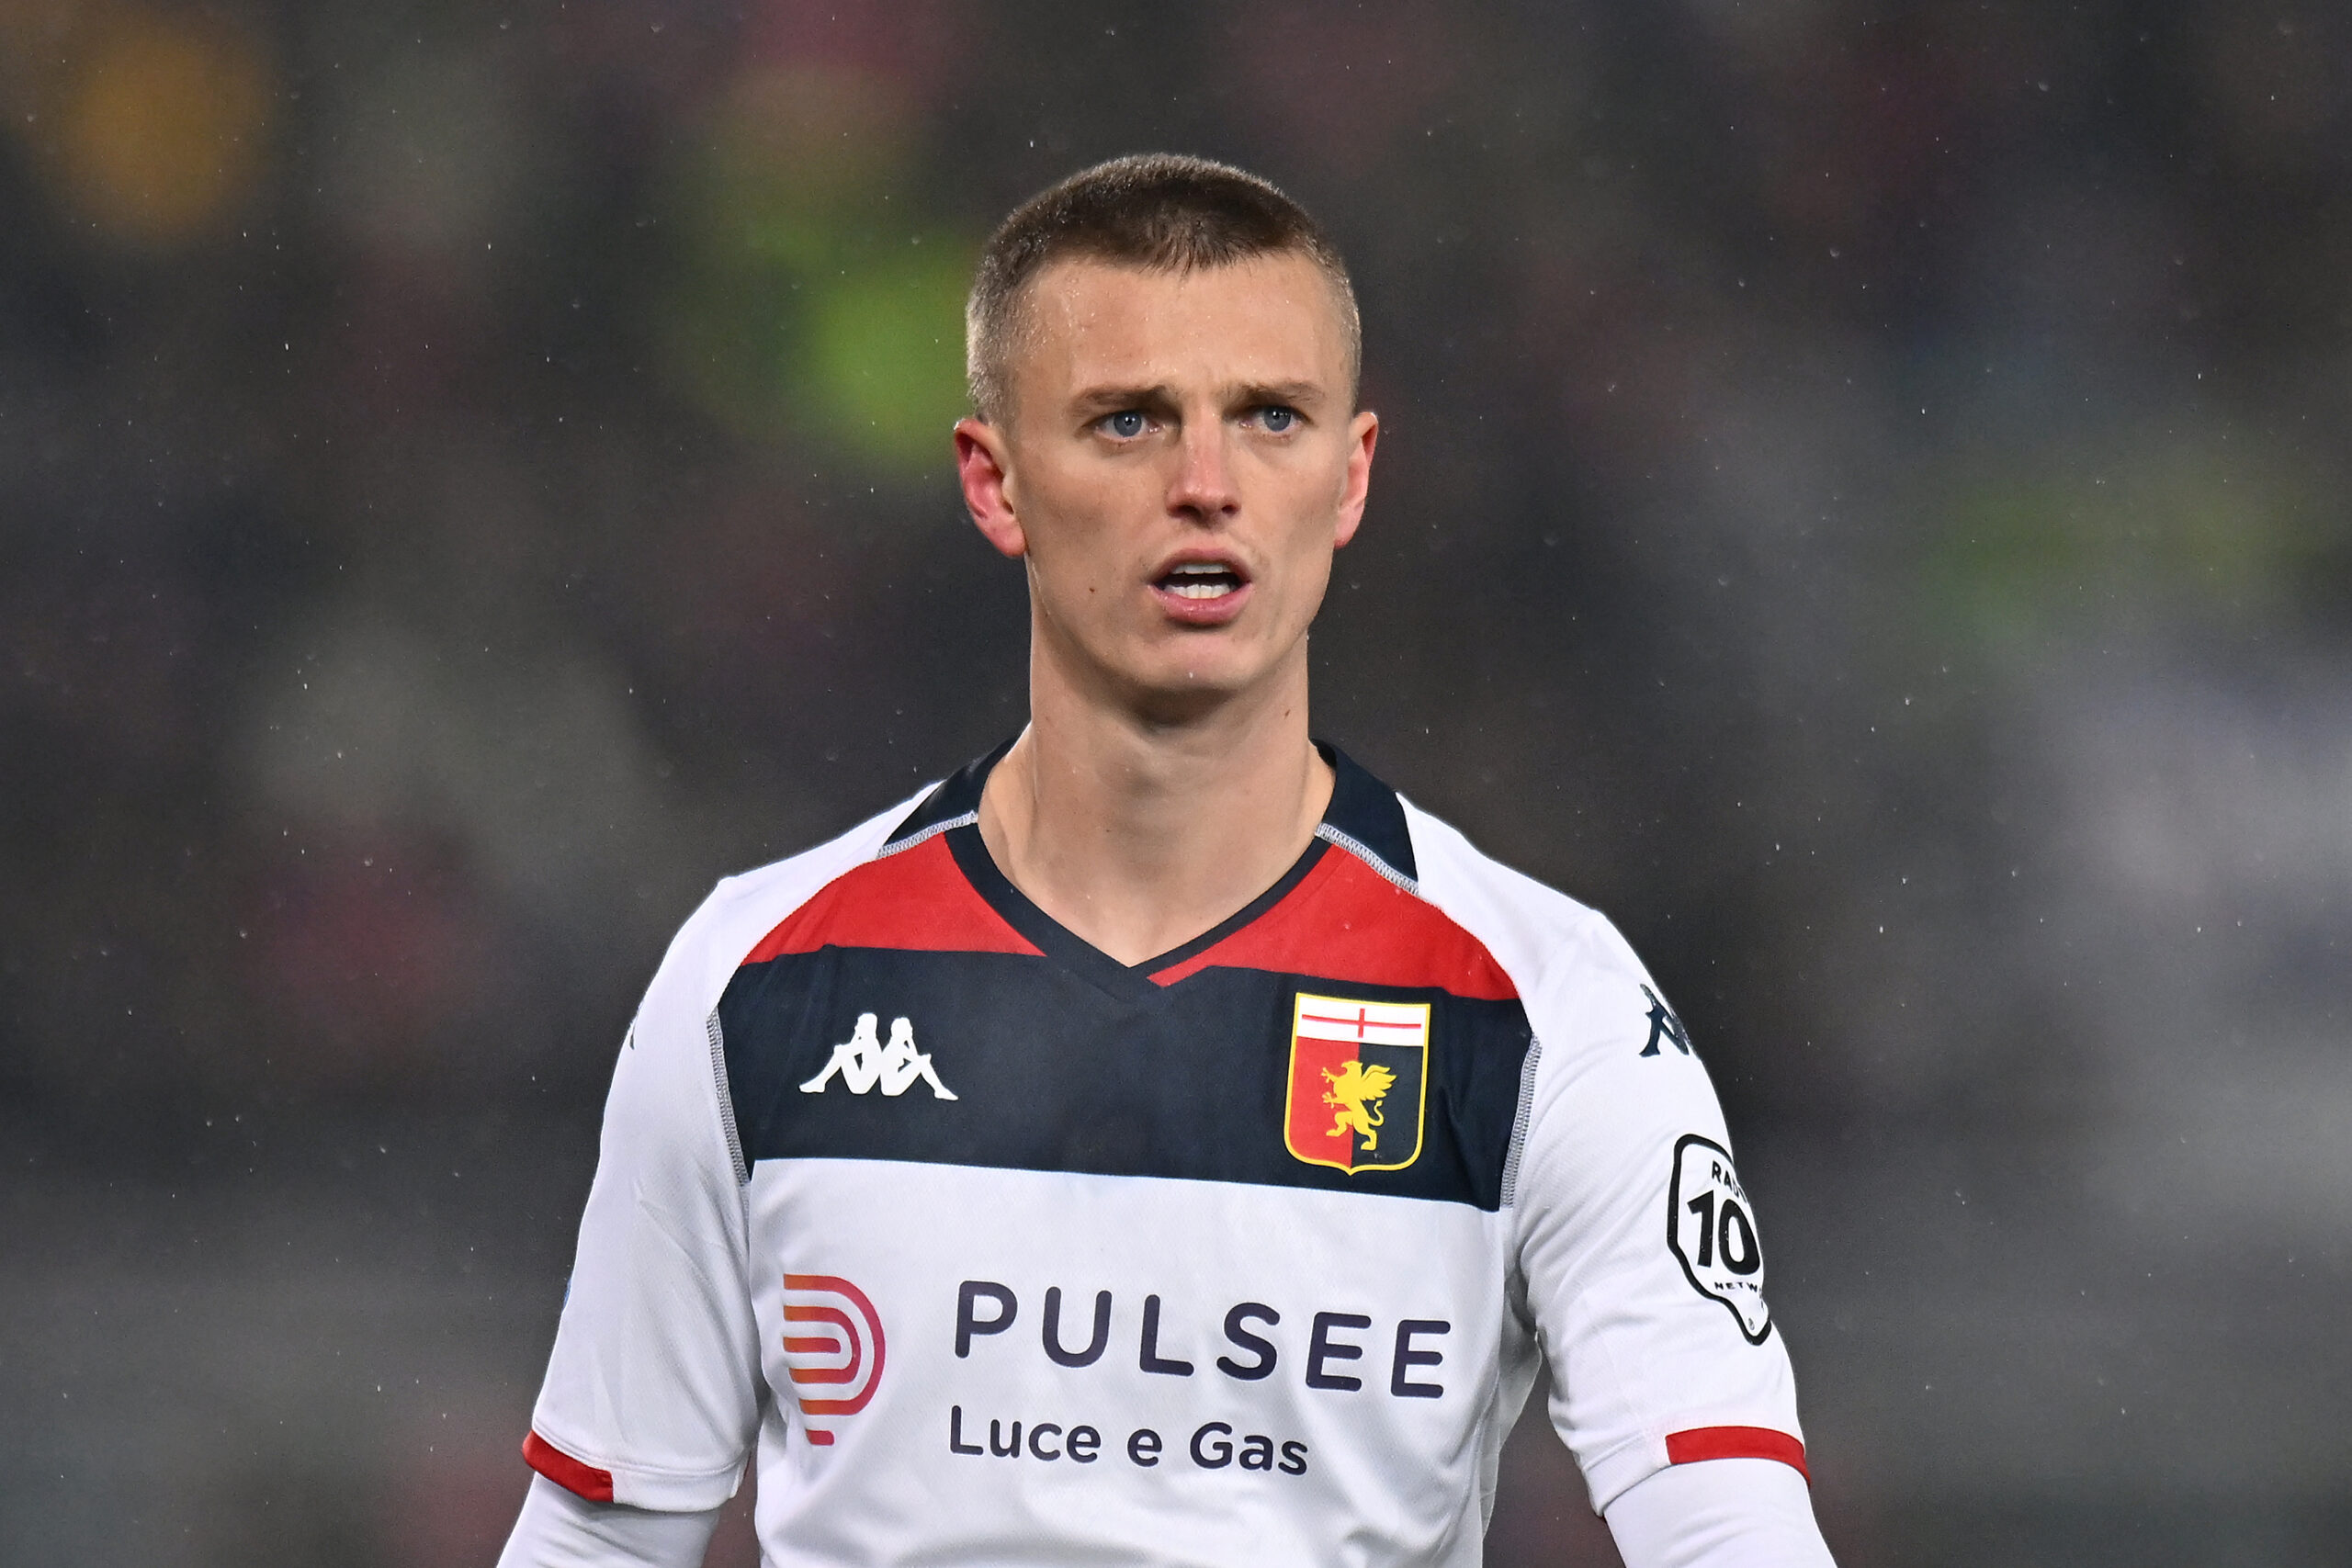 Inter have identified Albert Gudmundsson as a quality addition to their attack and are starting to ponder how to sign him. He has a substantial price tag.